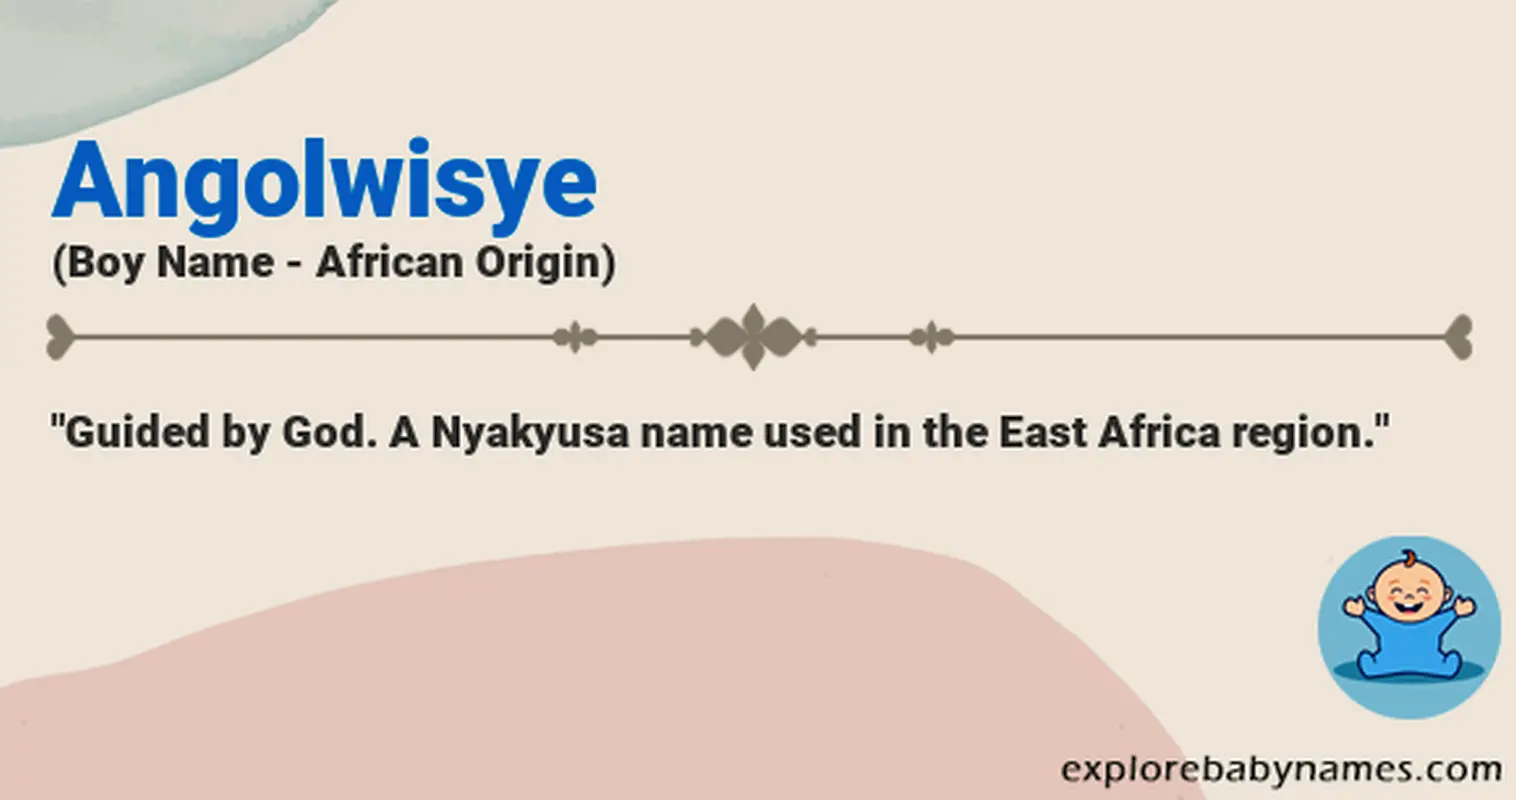 Meaning of Angolwisye